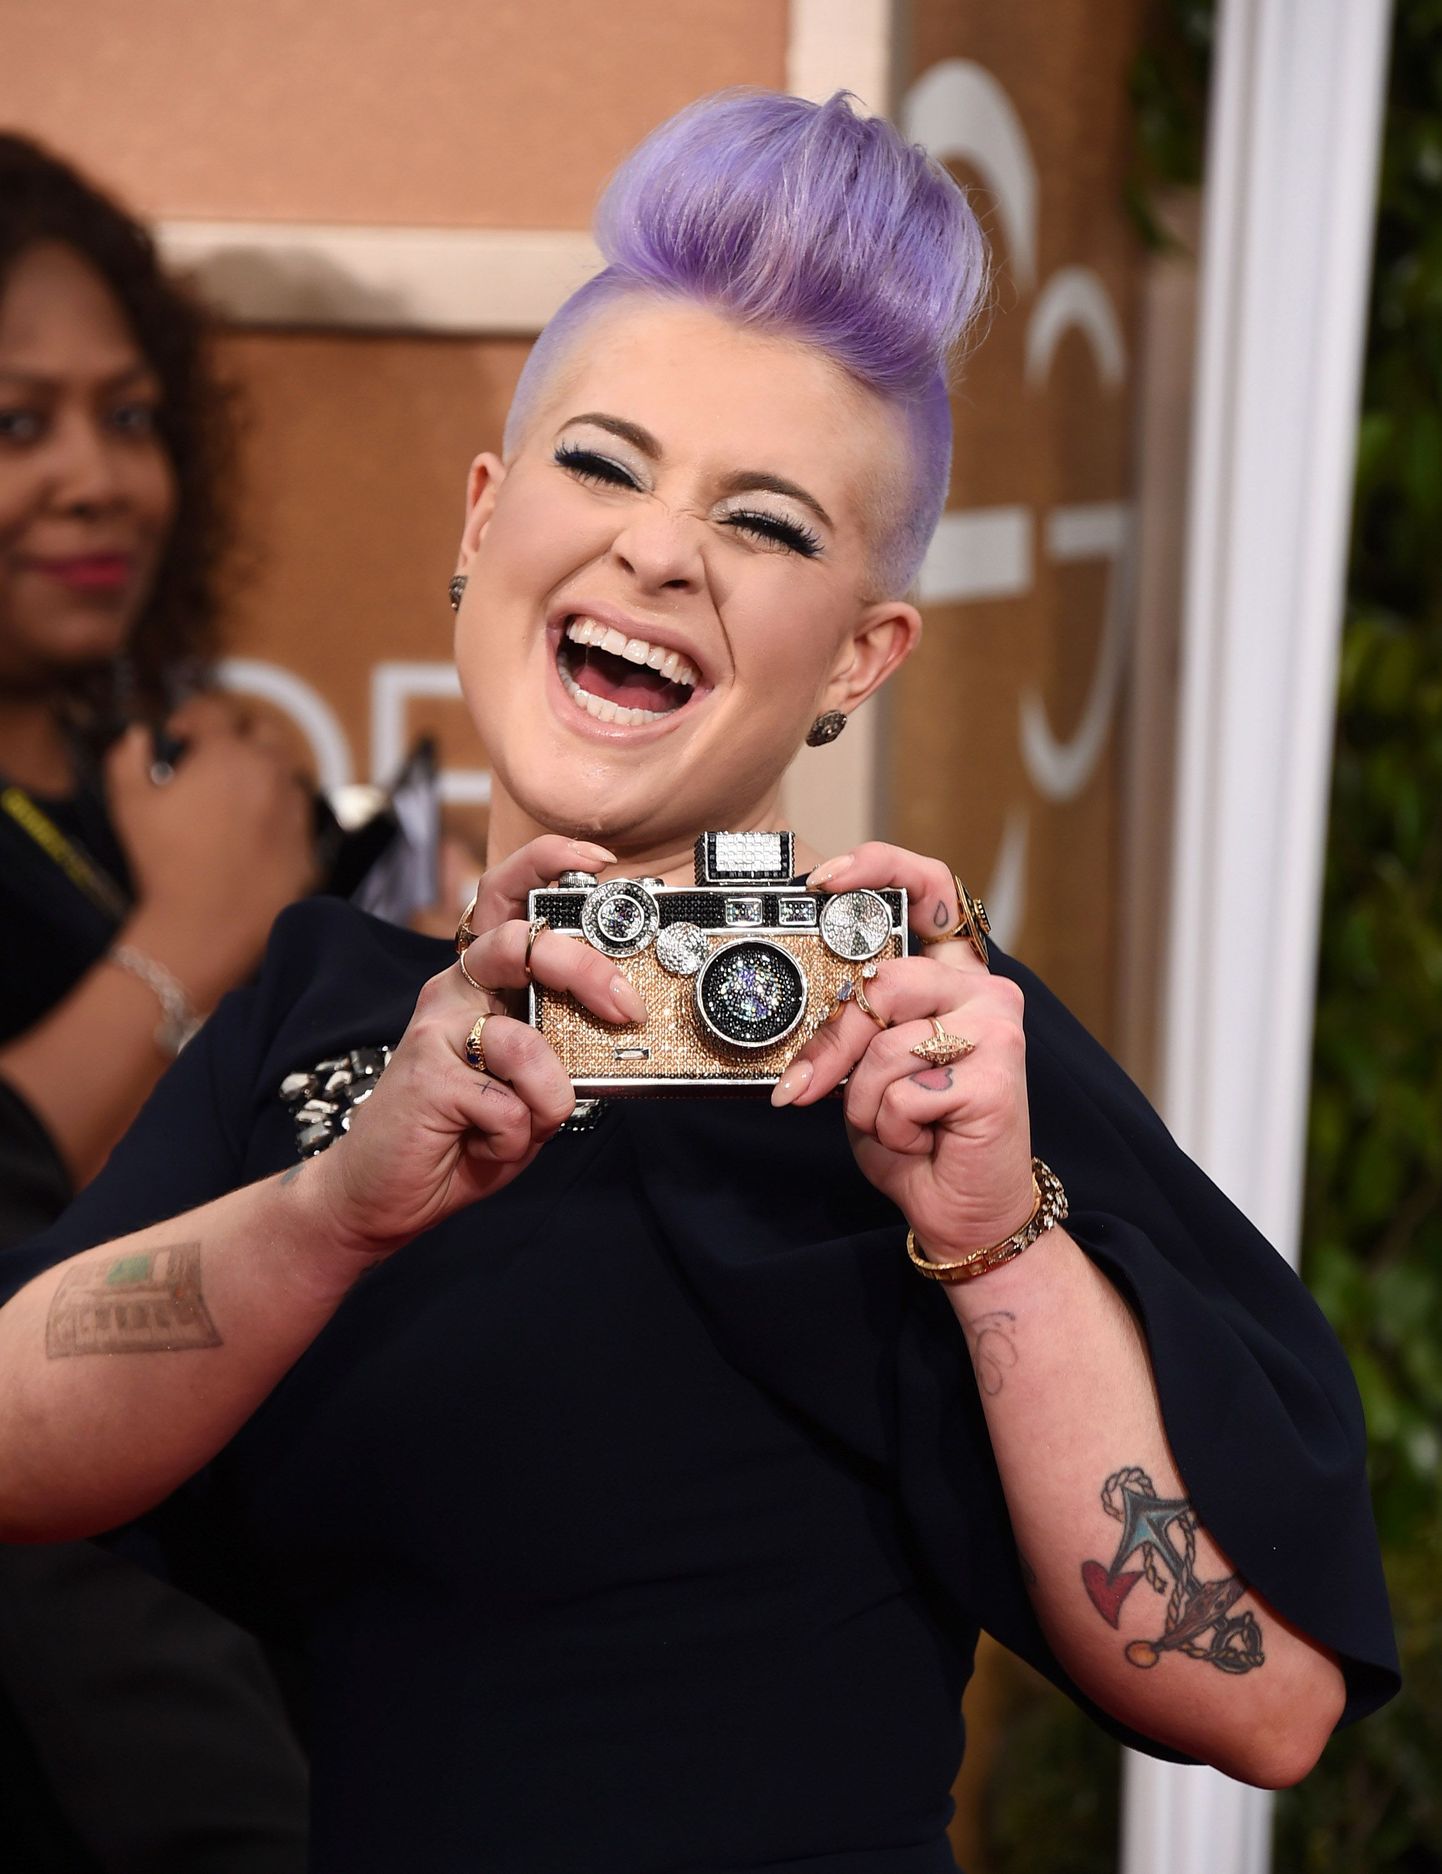 Kelly Osbourne arrives at the 72nd annual Golden Globe Awards at the Beverly Hilton Hotel on Sunday, Jan. 11, 2015, in Beverly Hills, Calif. (Photo by Jordan Strauss/Invision/AP)